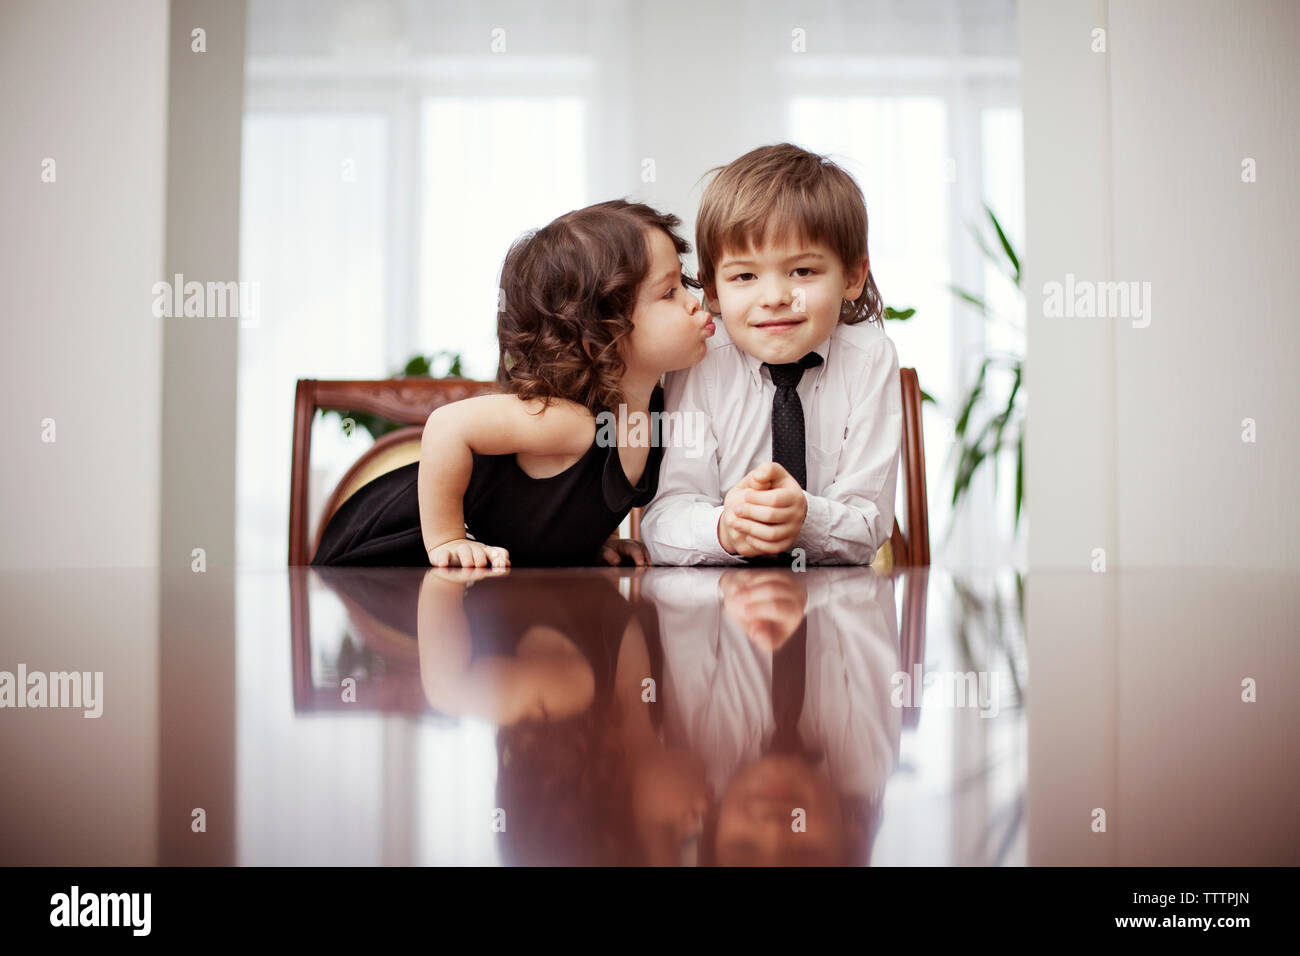 Cute girl kissing brother while sitting at table Stock Photo